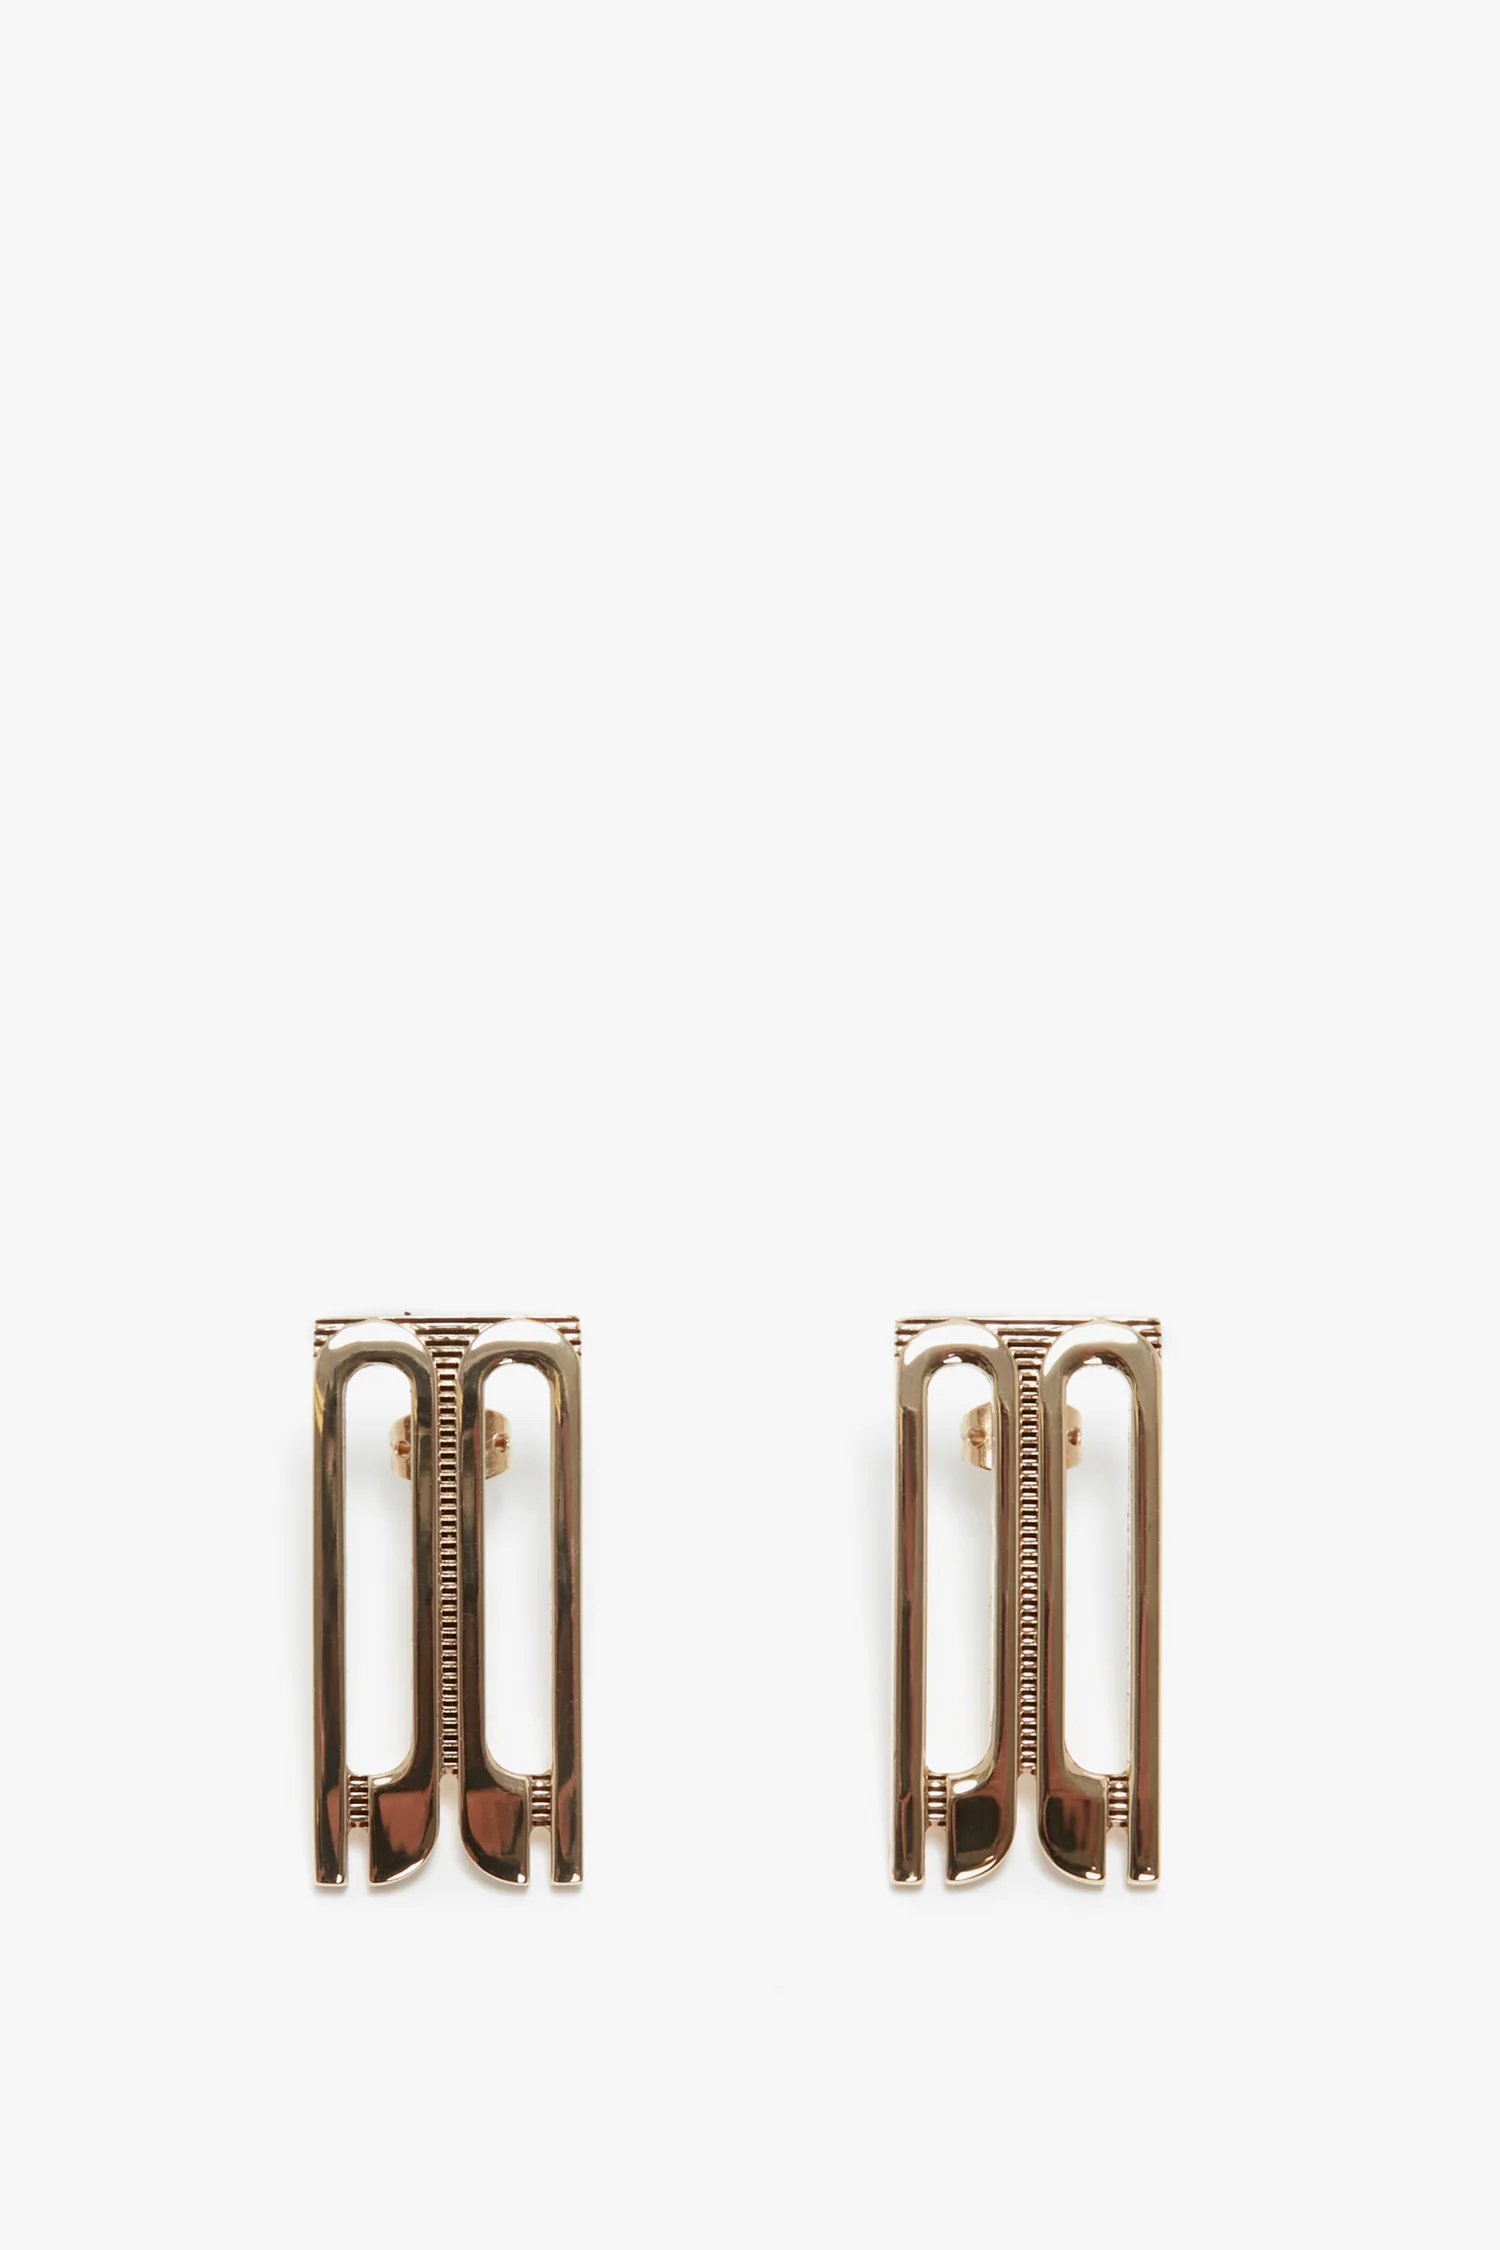 https://us.victoriabeckham.com/products/exclusive-frame-stud-earrings-in-gold